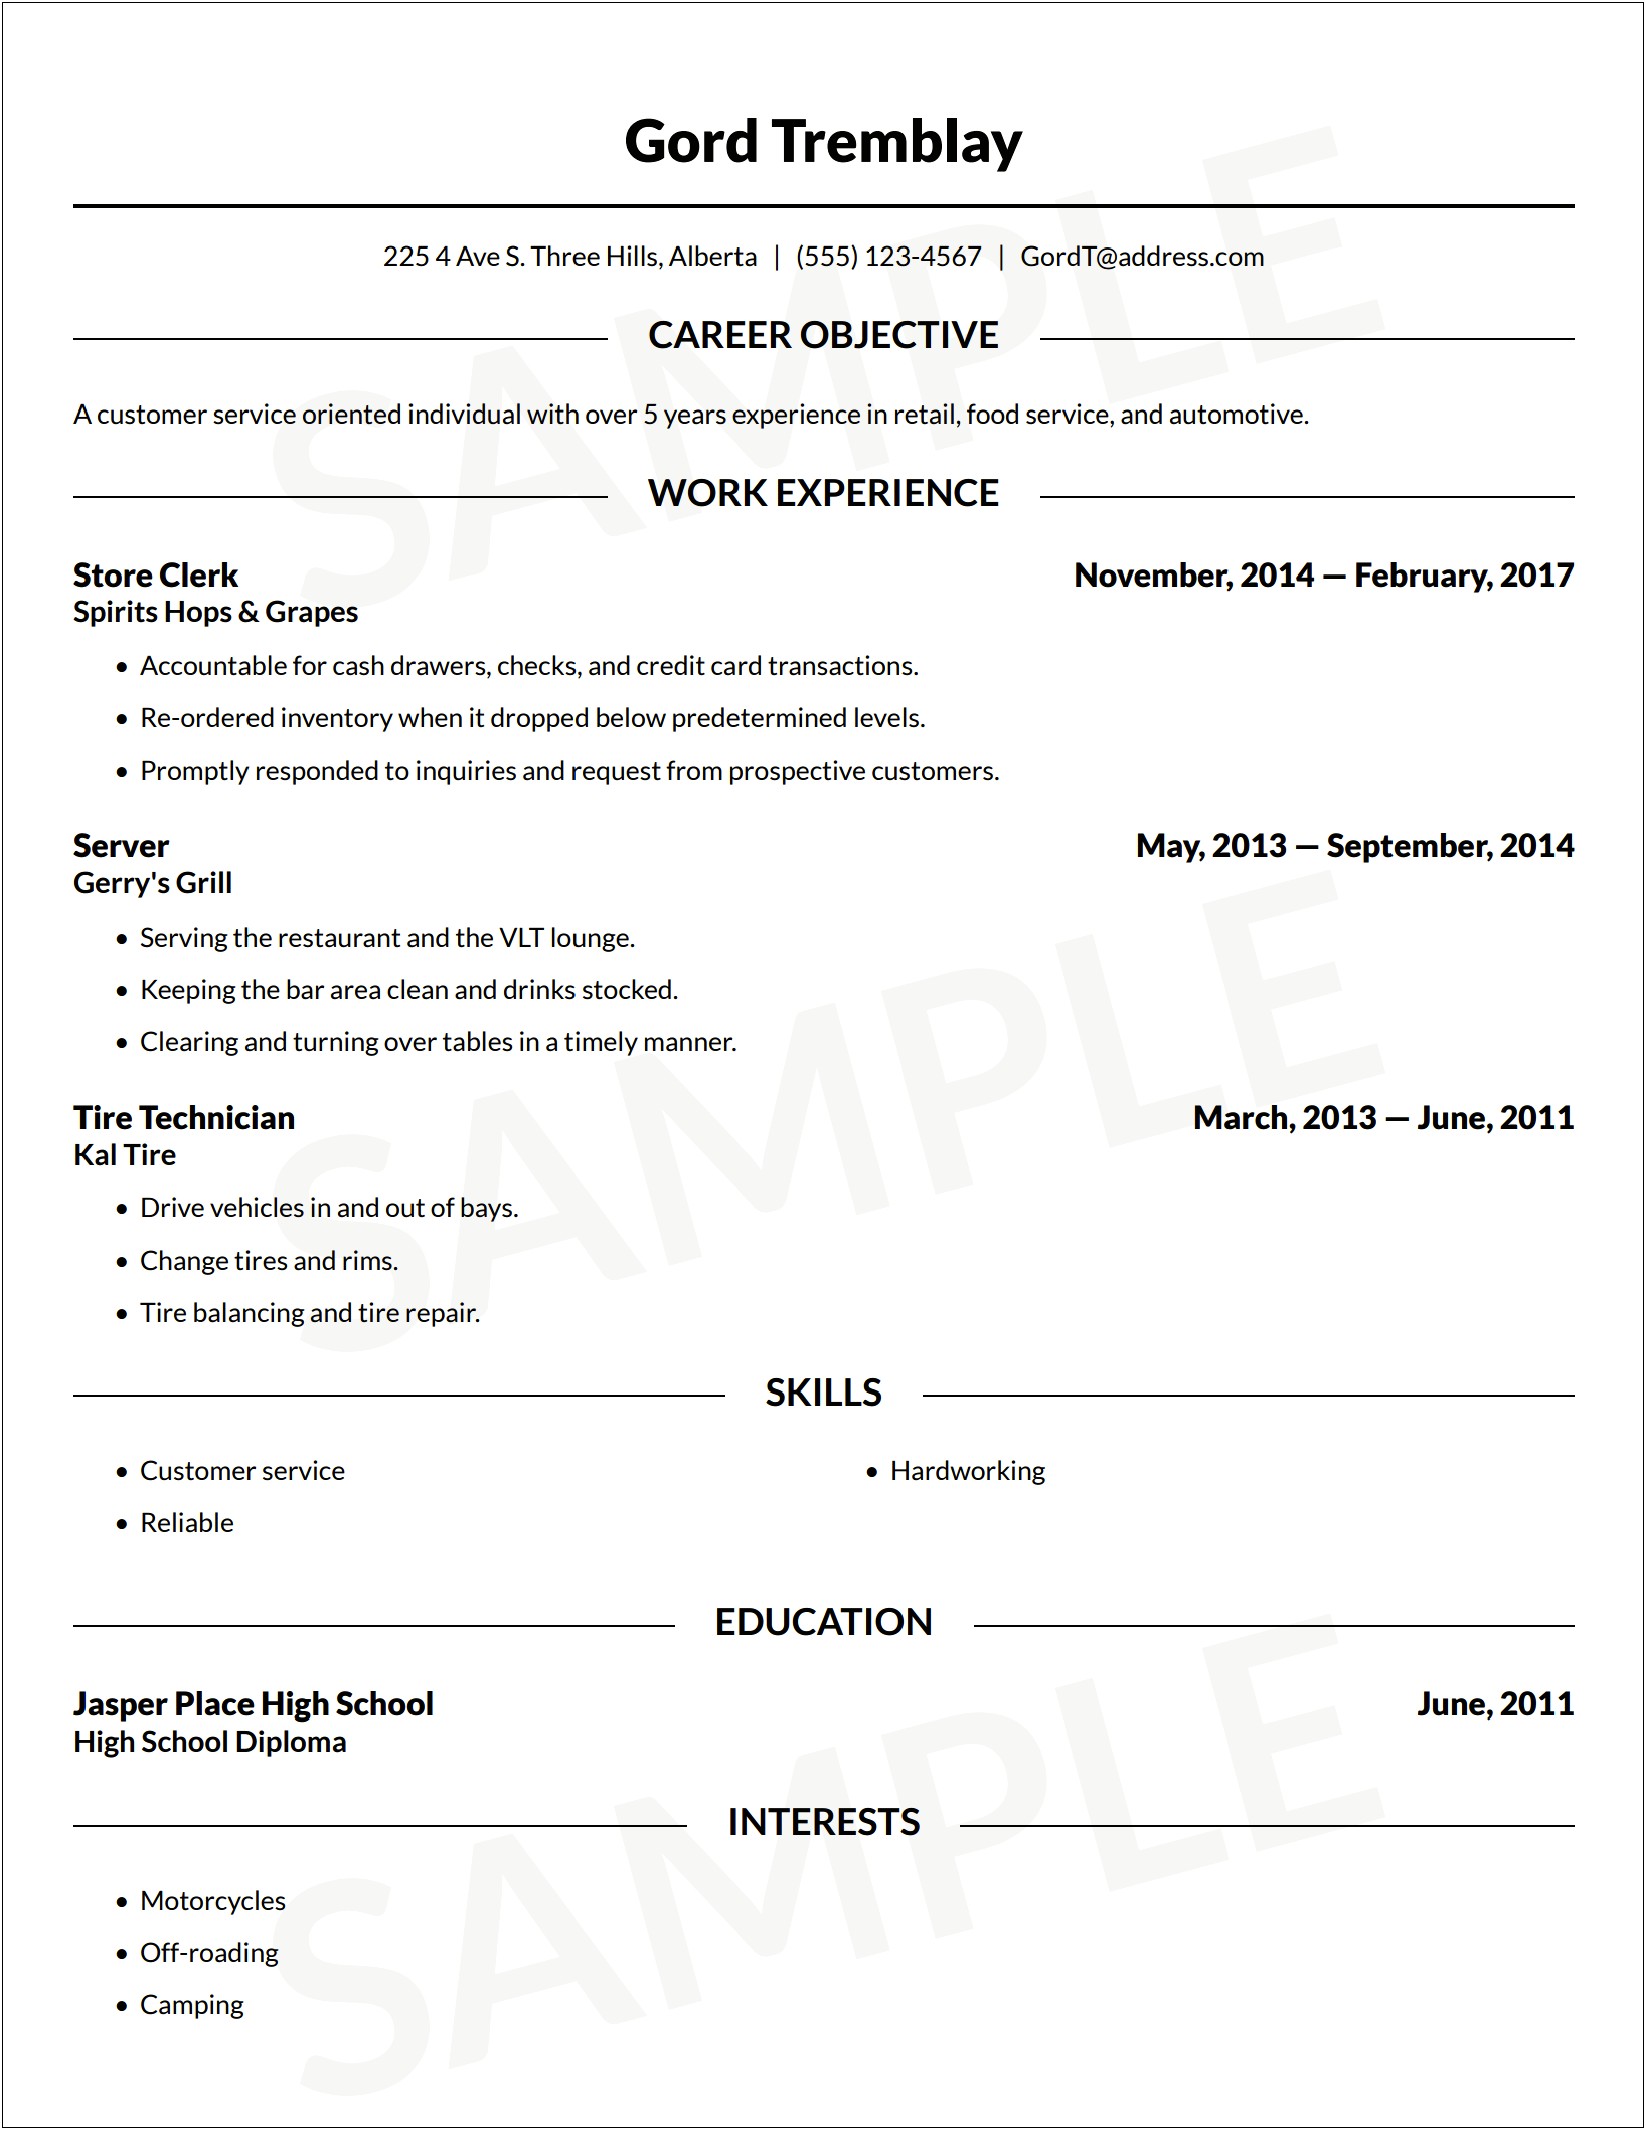 Resume To Apply For Job In Canada